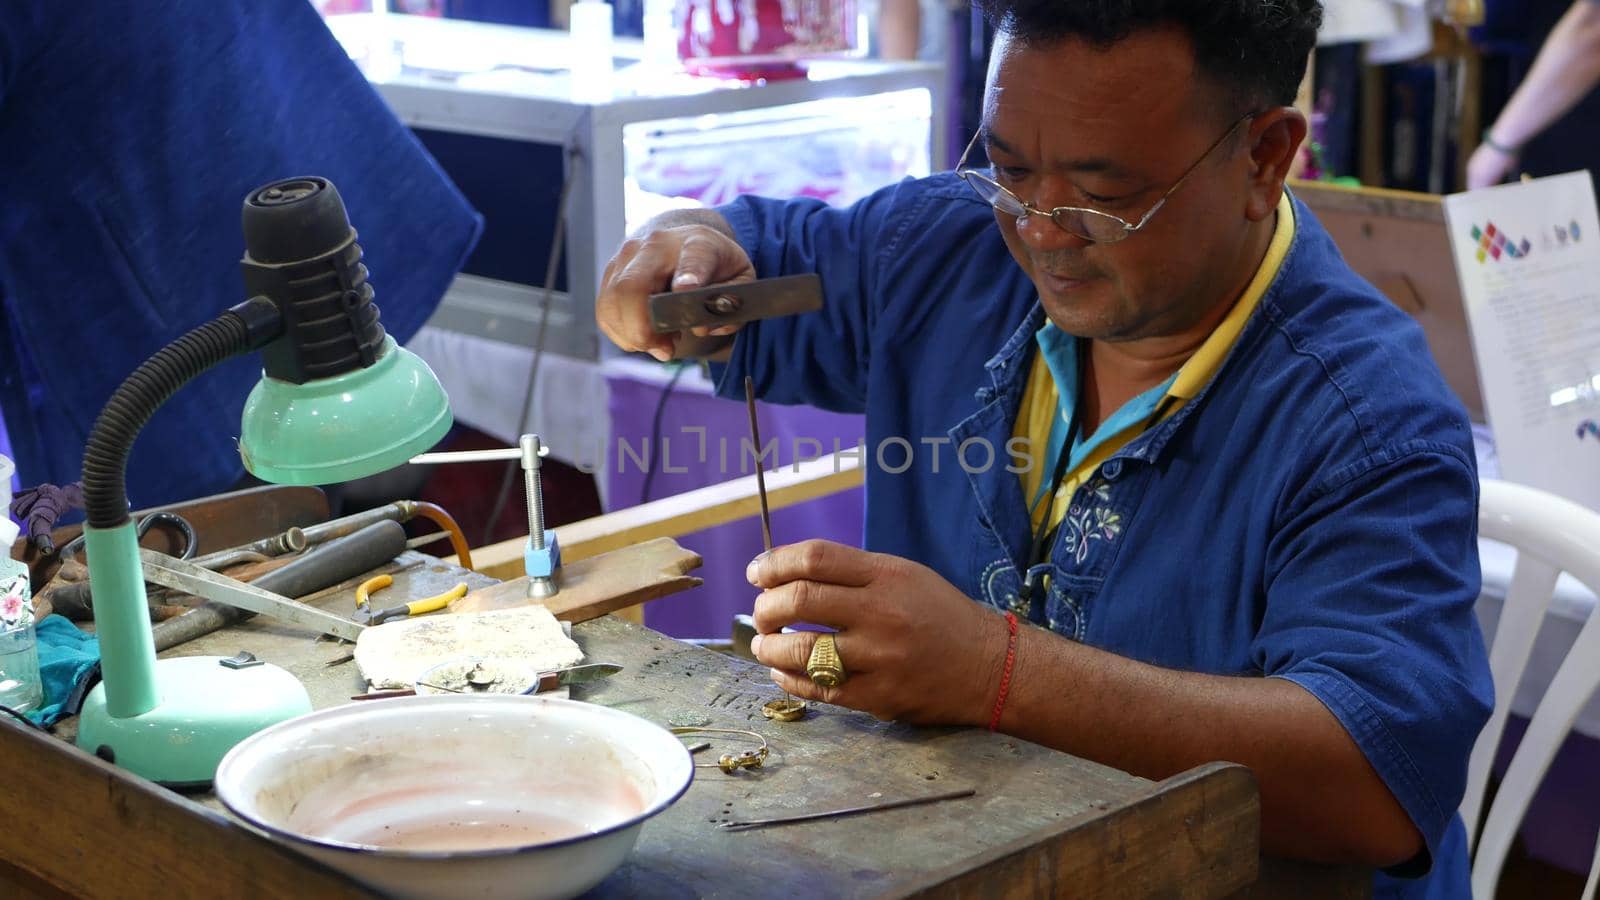 BANGKOK, THAILAND - 10 JULY, 2019: Ethnic jeweler working during exhibition. Ethnic craftsman in glasses sitting at shabby table and making jewelry while taking part in trade show by DogoraSun